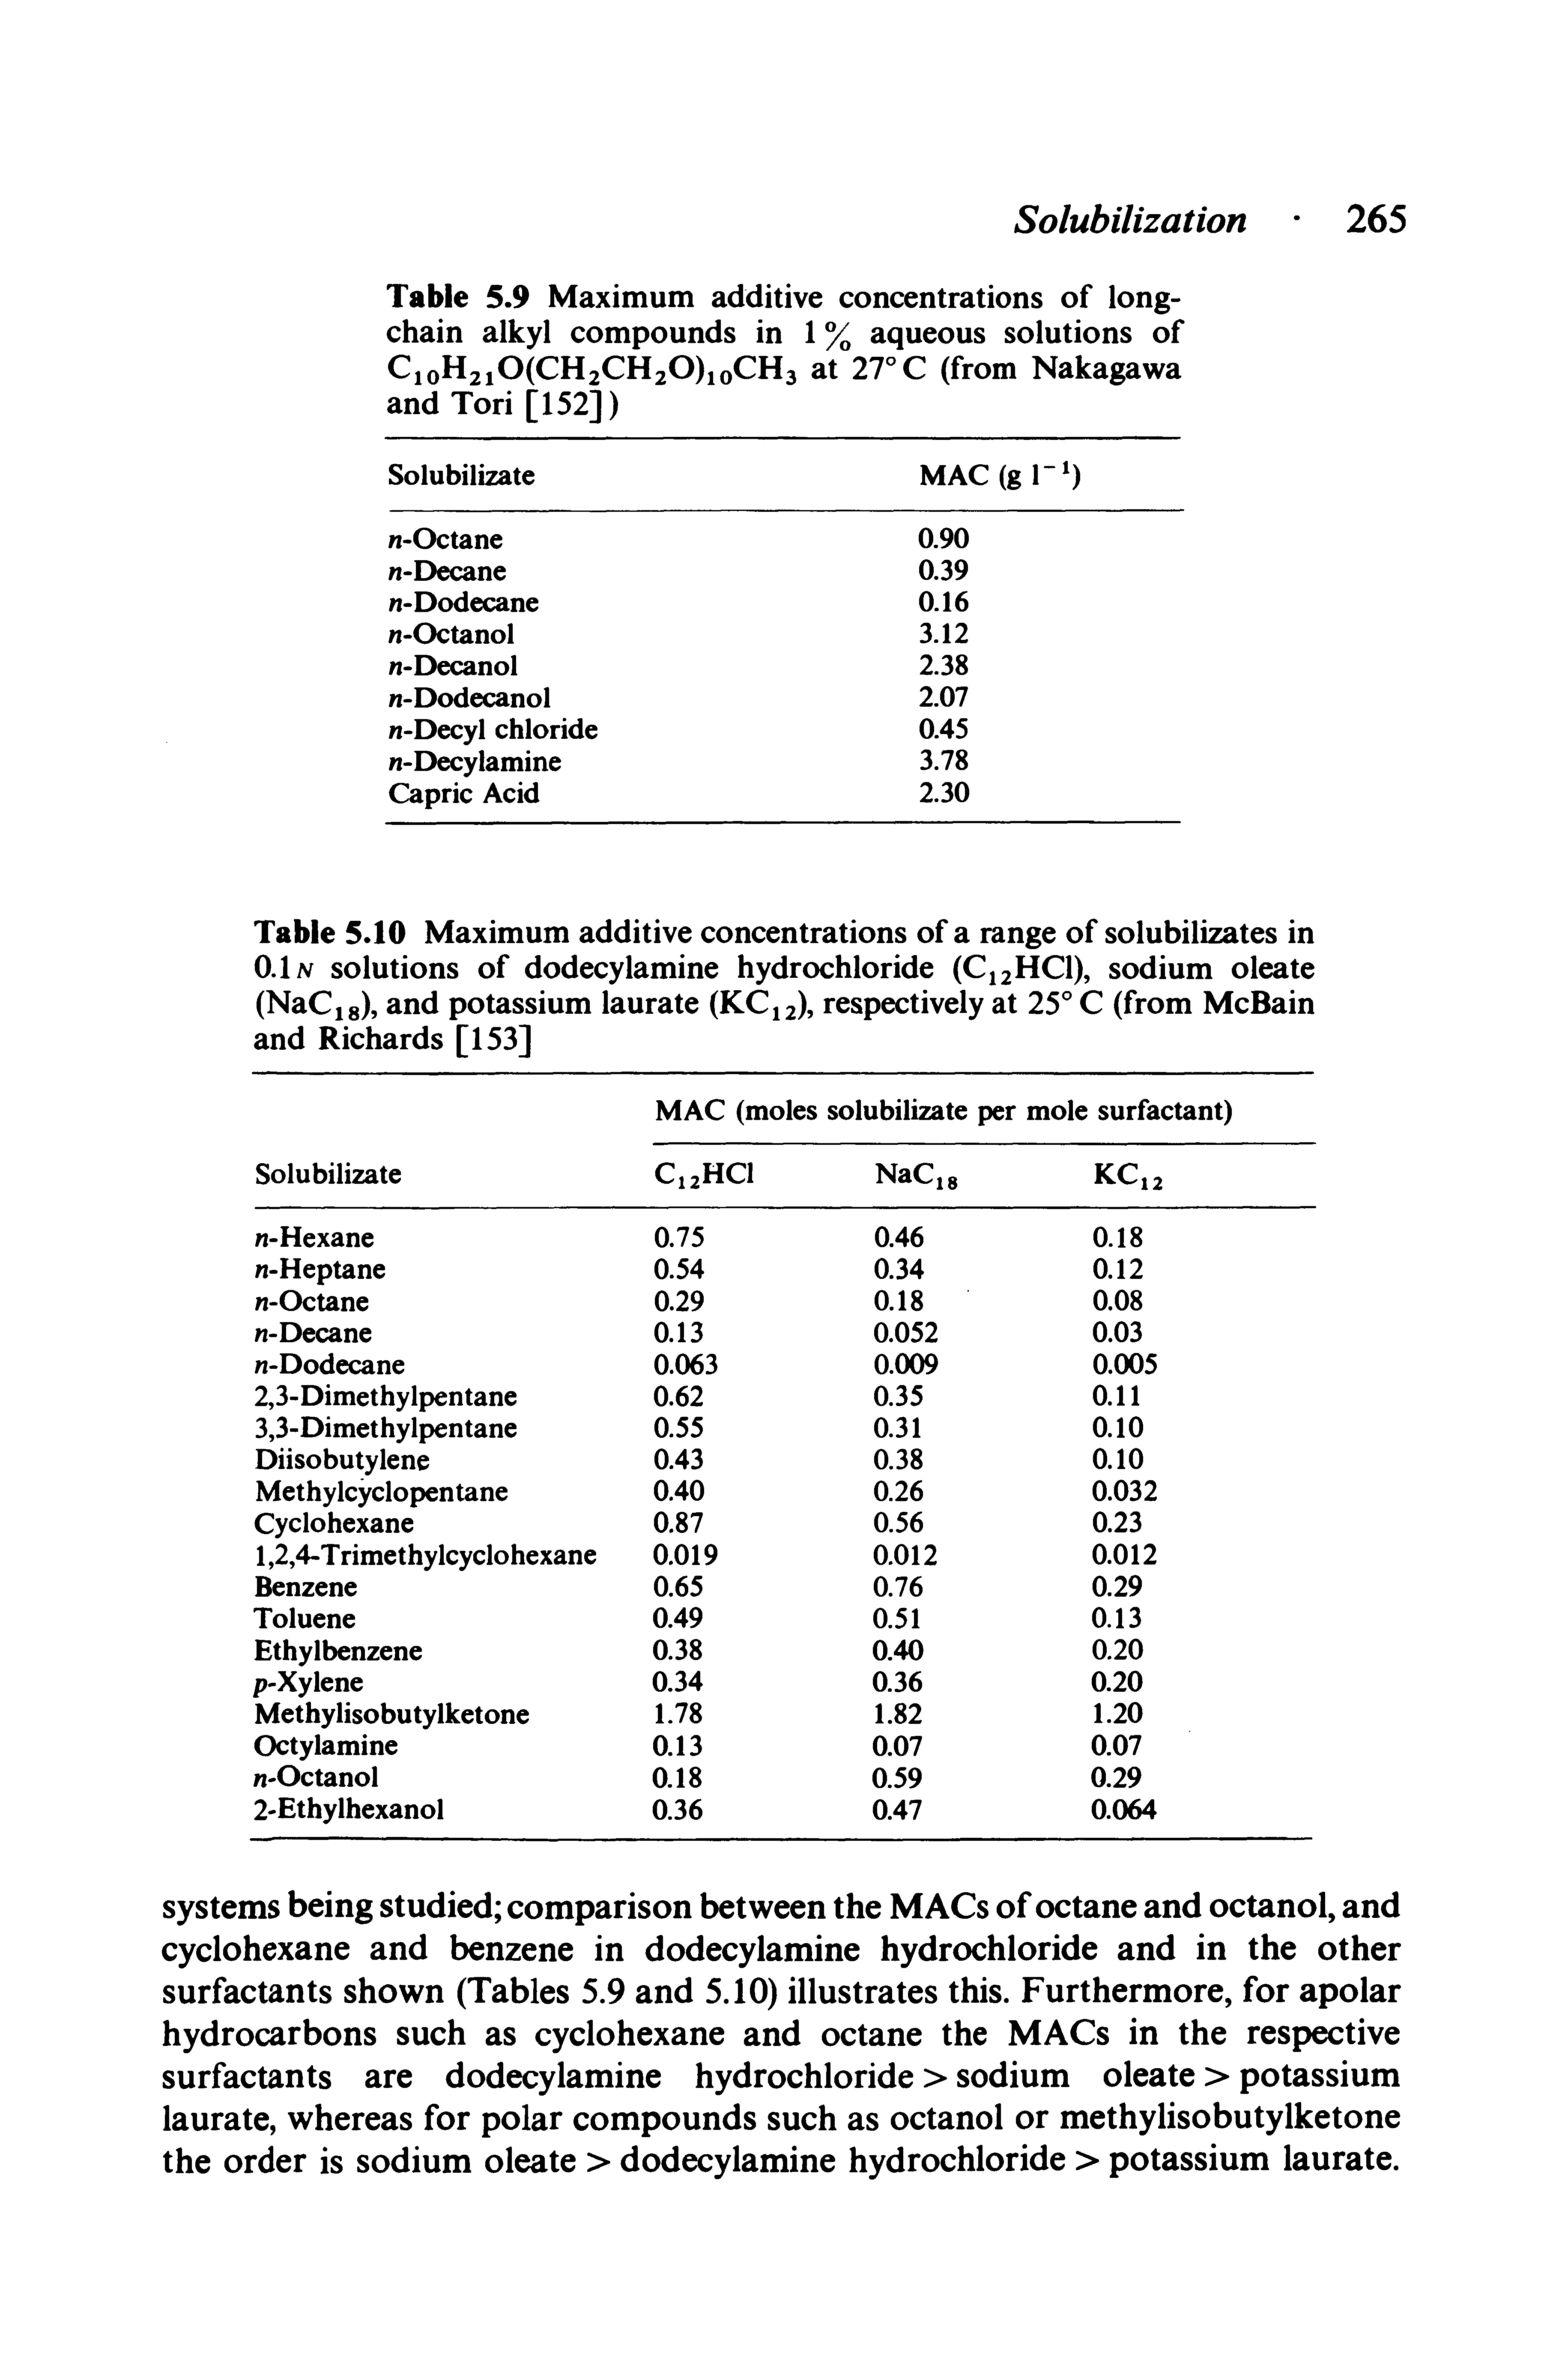 Table 5.10 Maximum additive concentrations of a range of solubilizates in O.In solutions of dodecylamine hydrochloride (C12HCI), sodium oleate ...